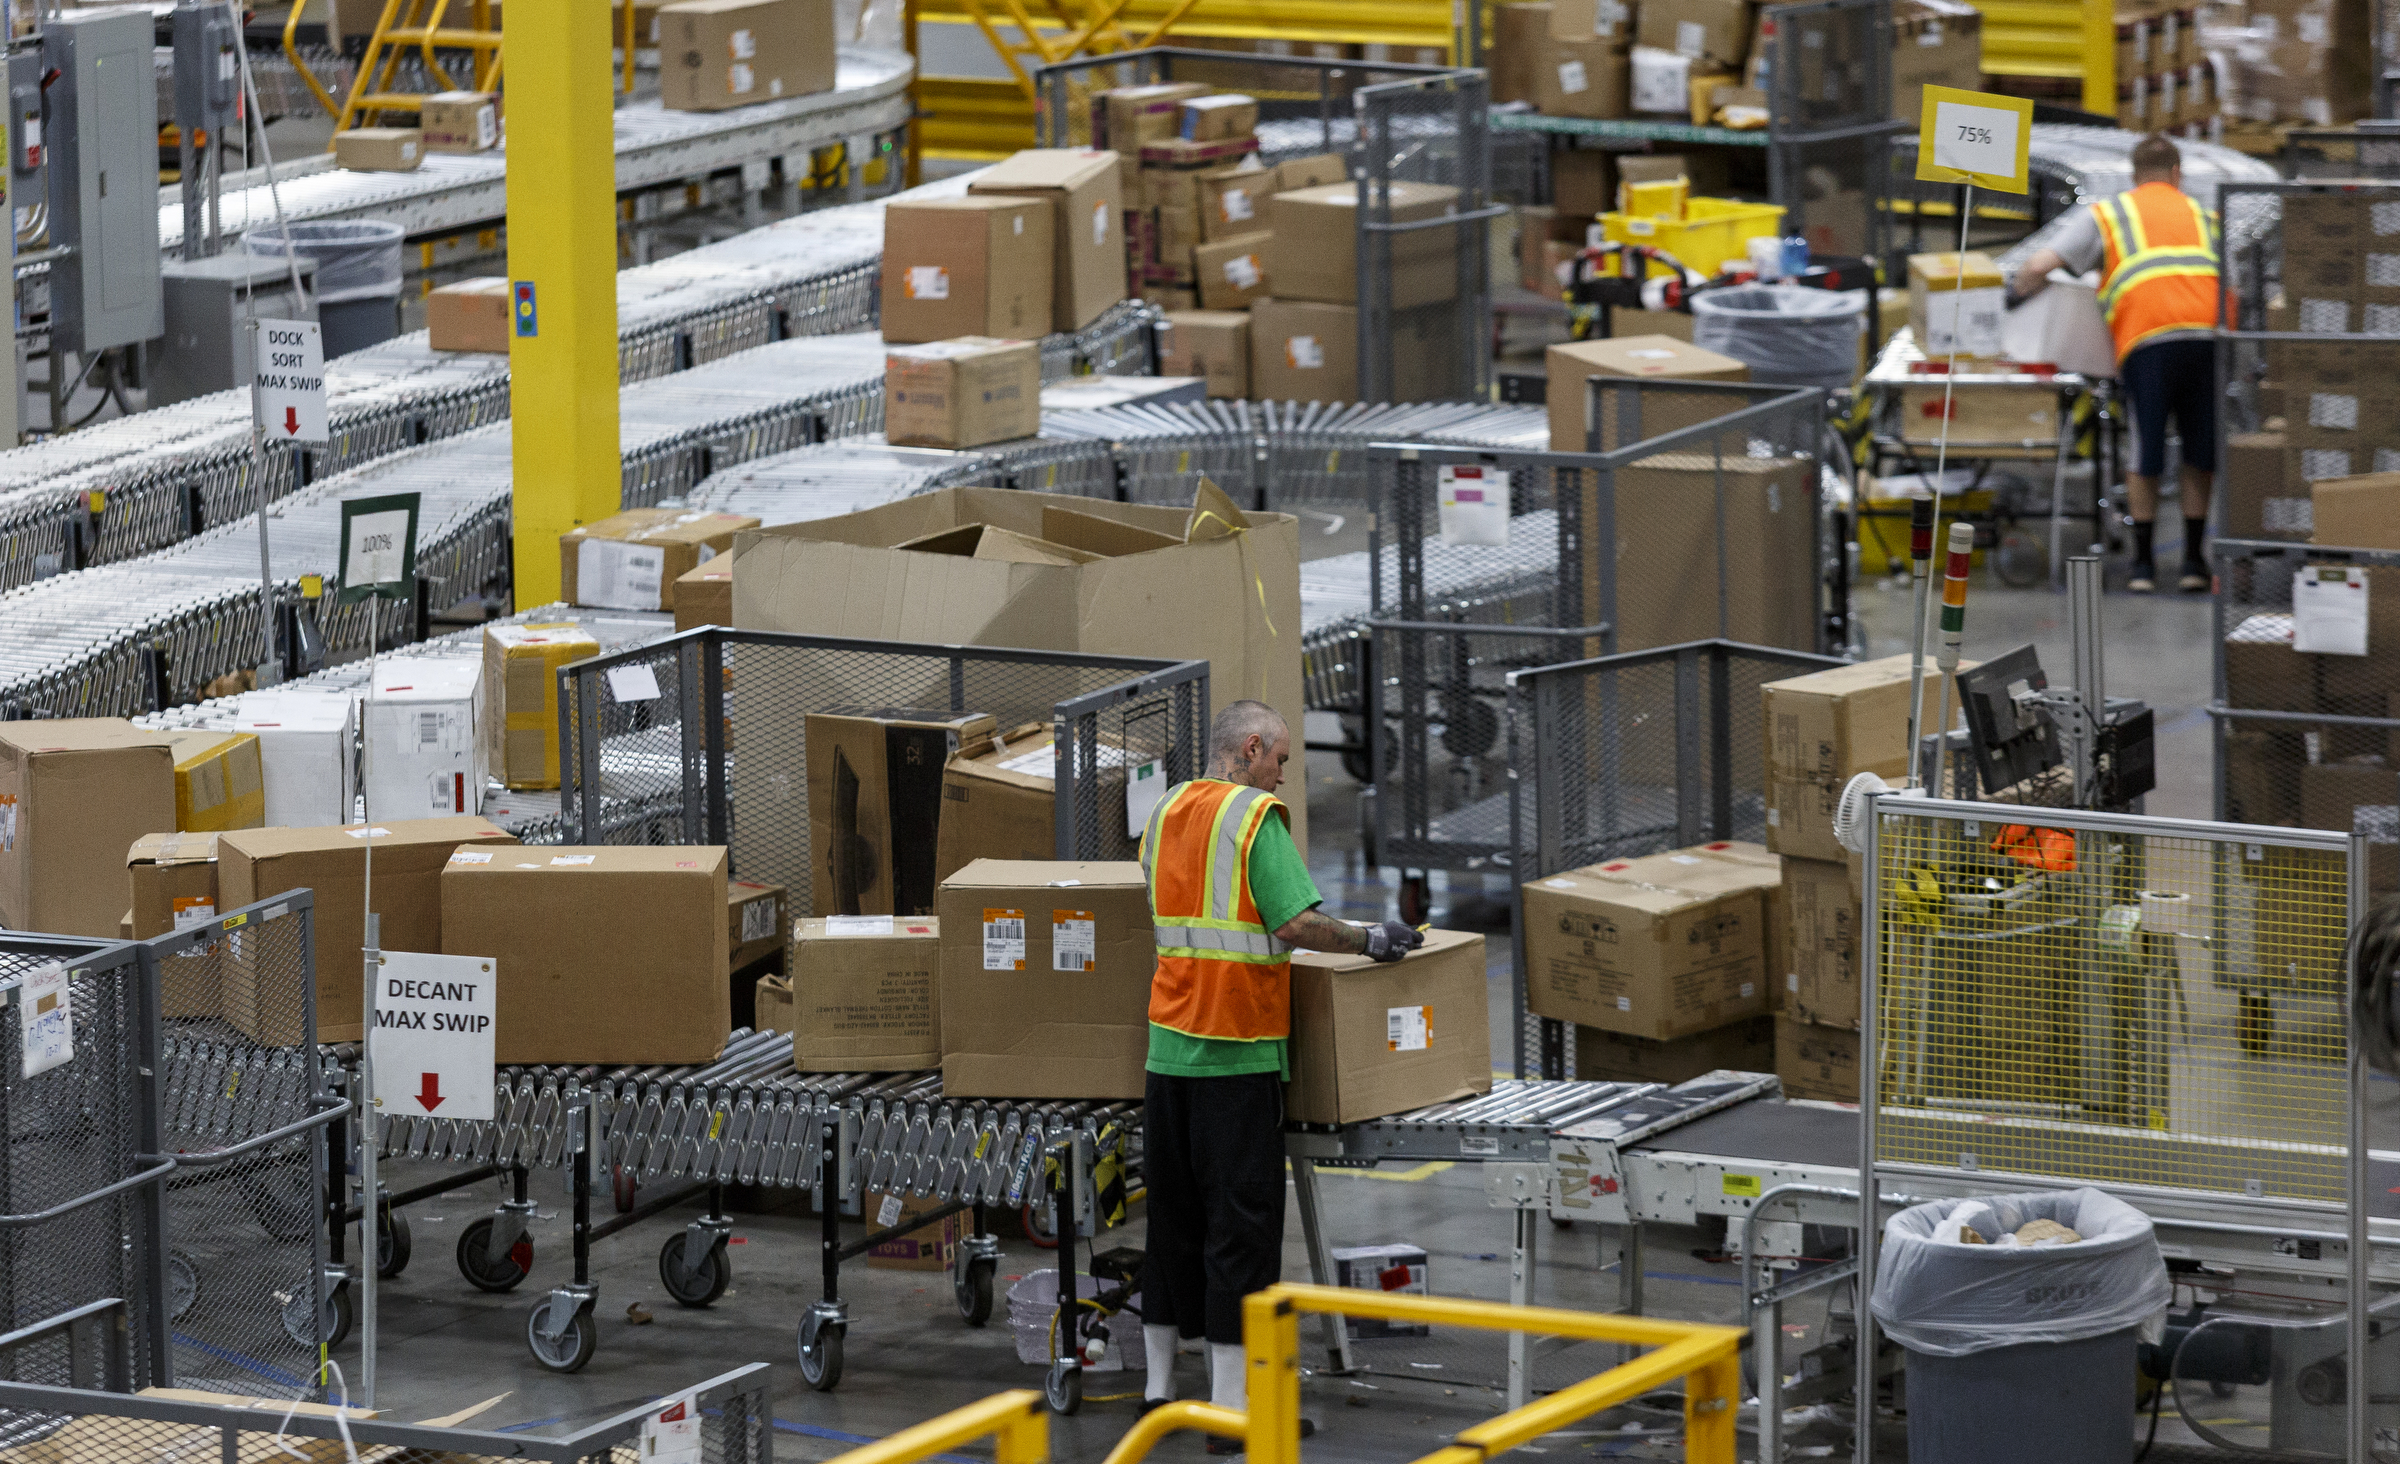 Walmart to lay off 2,000 employees from e-commerce warehouses